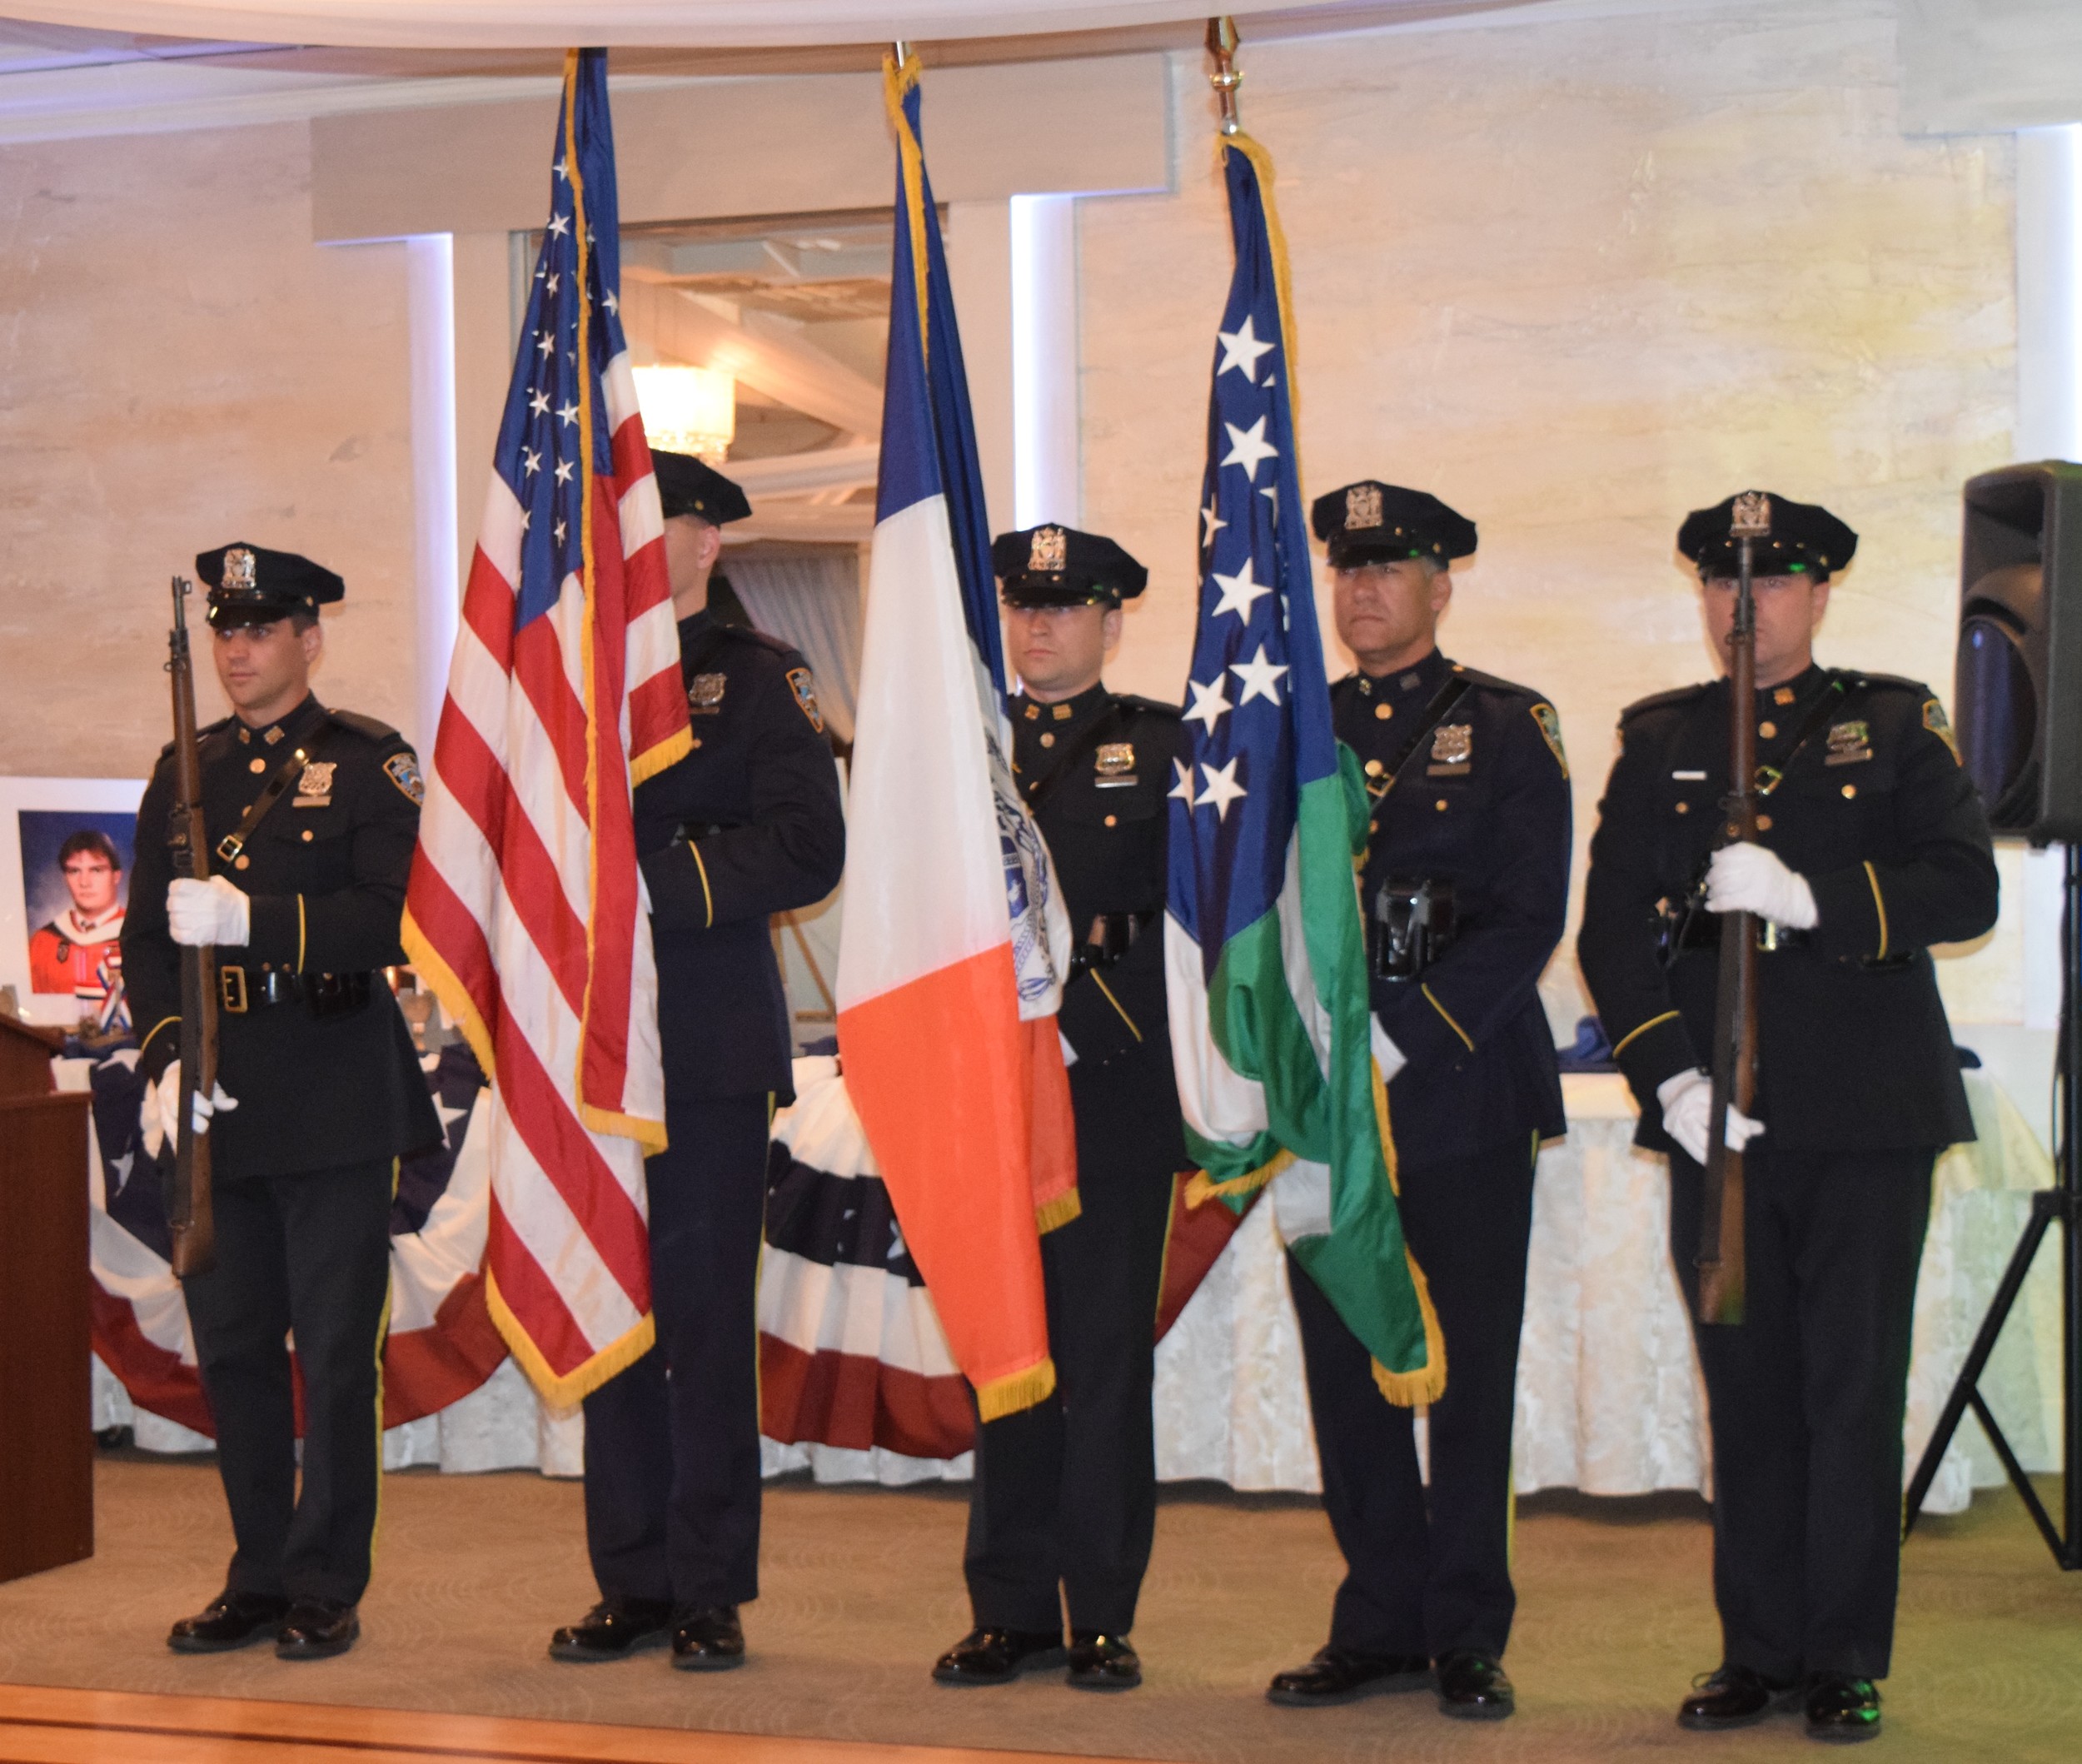 The Patriot award ceremony was a formal affair, complete with police color guard.